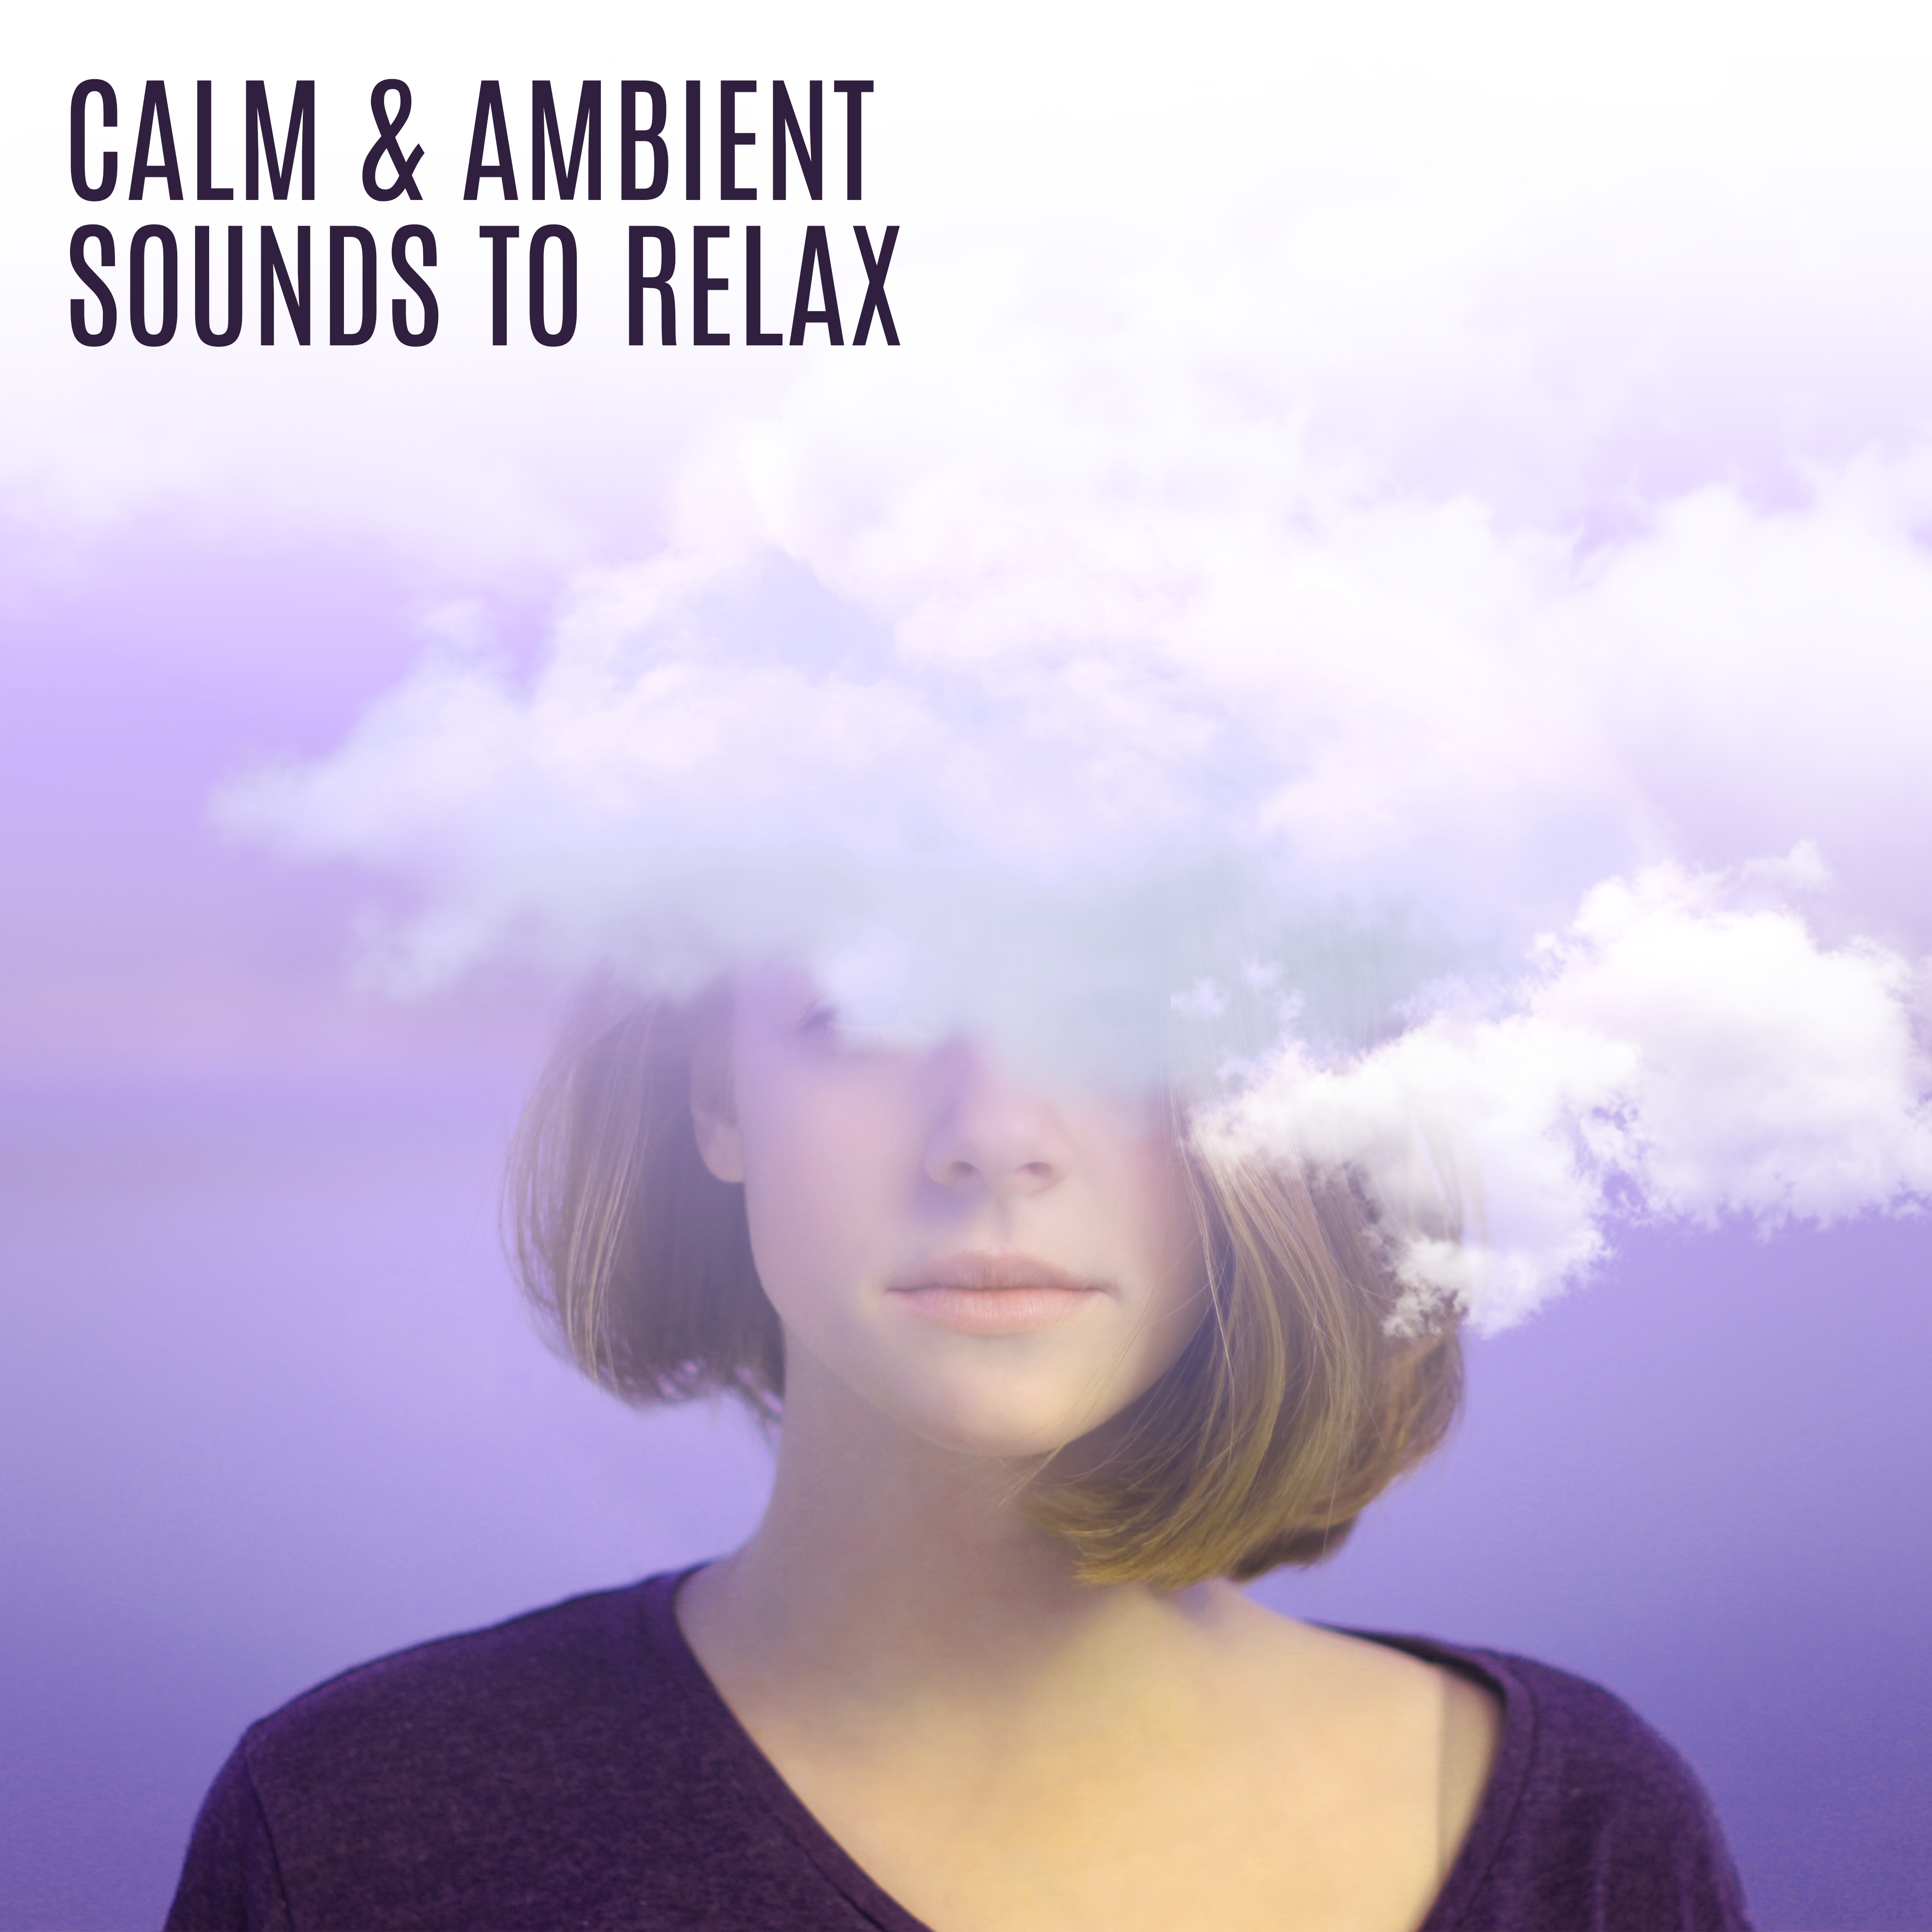 Calm  Ambient Sounds to Relax  Stress Relief, Music to Calm Down, Peaceful Mind, New Age Relaxation